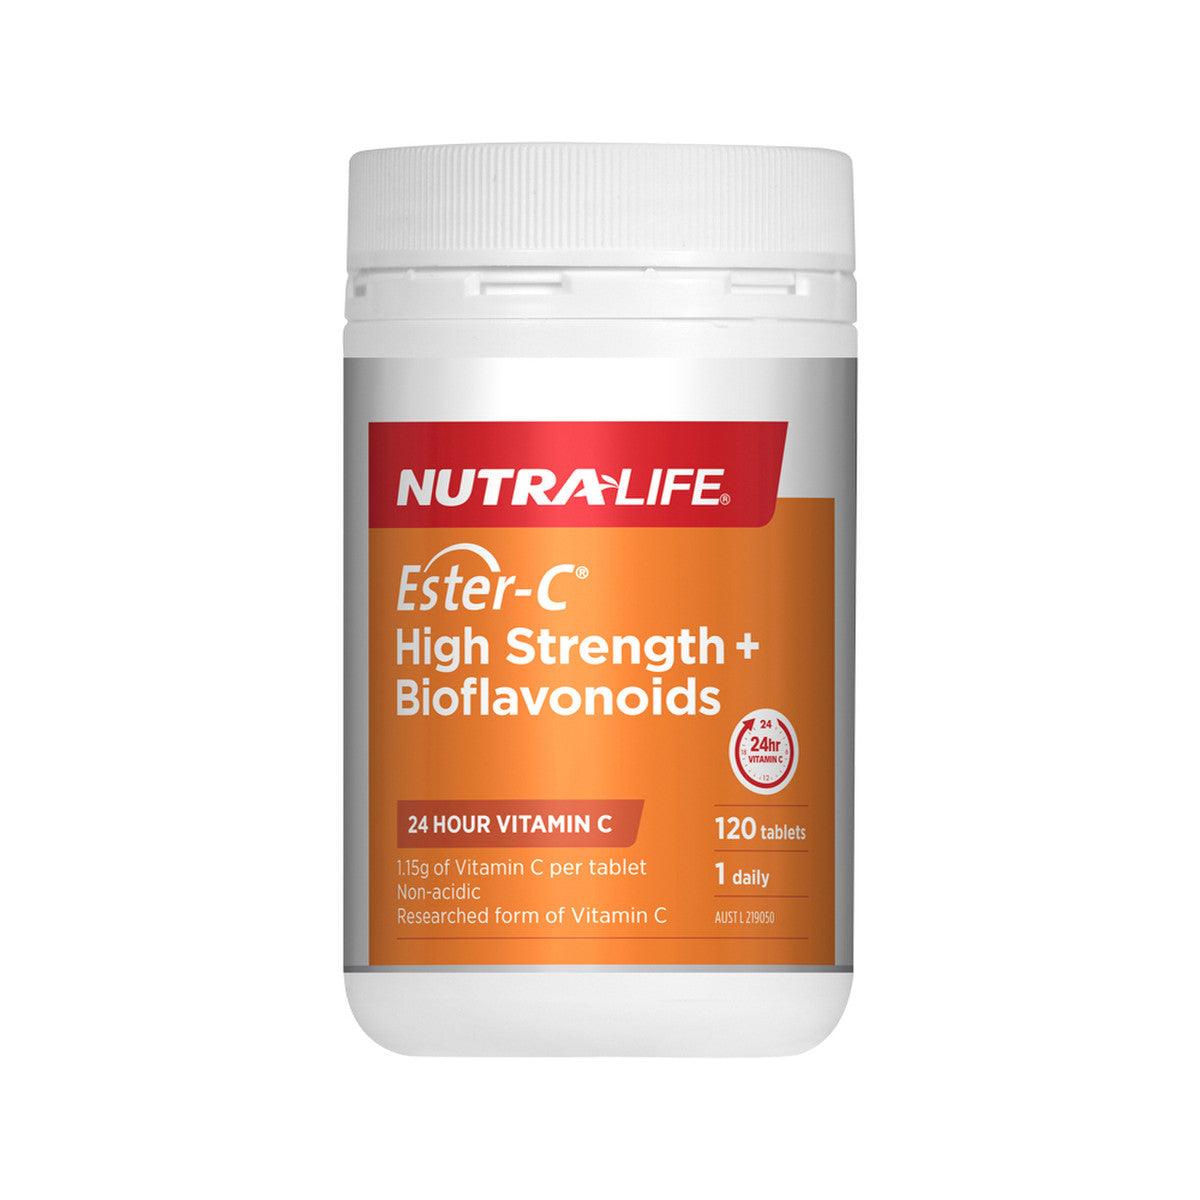 NutraLife Ester-C High Strength and Bioflavonoids 1500mg 120 Tablets - QVM Vitamins™